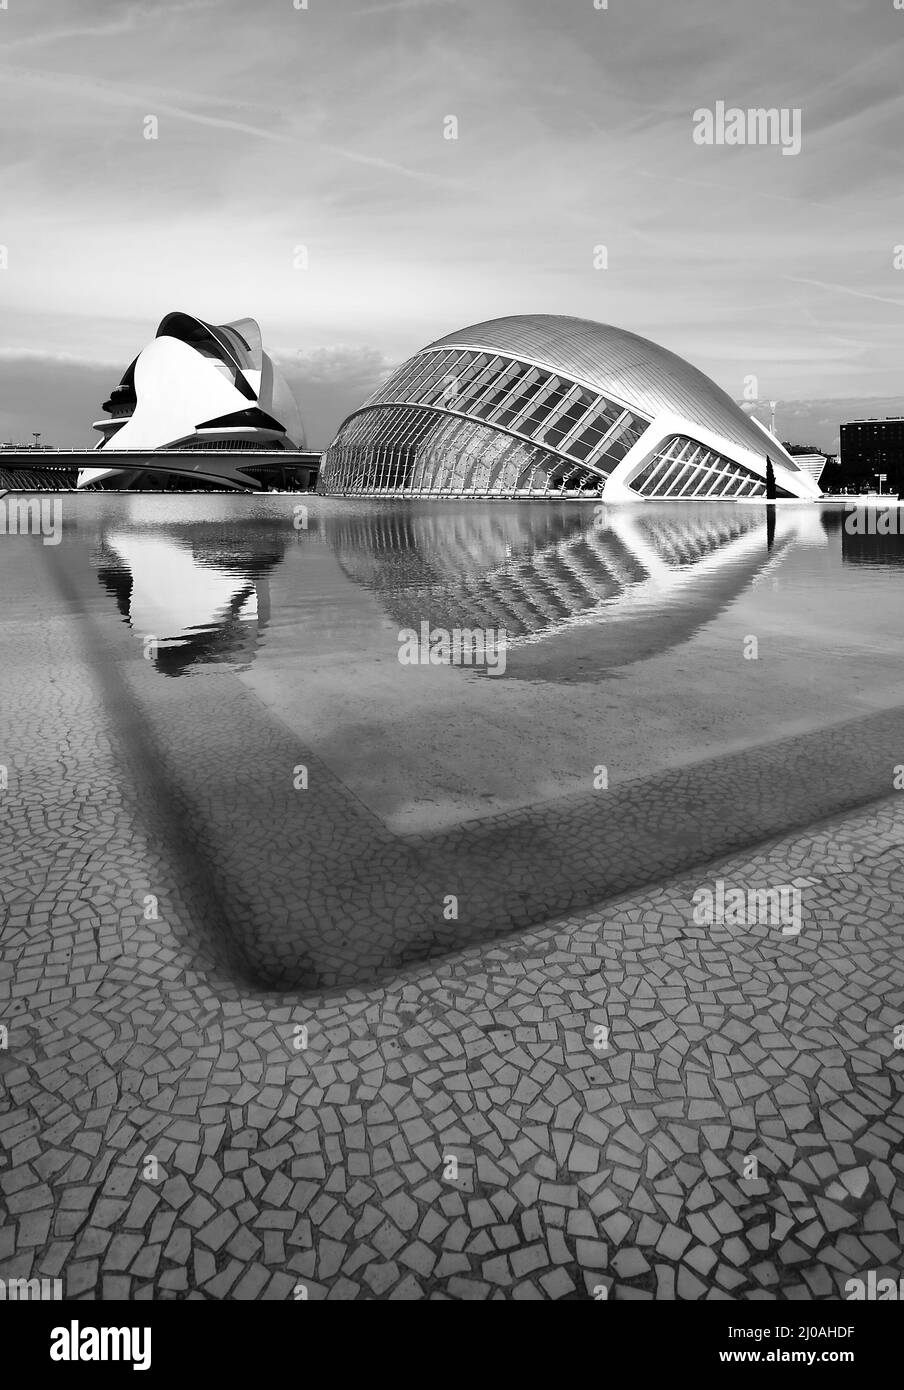 City of Arts and Sciences Stock Photo